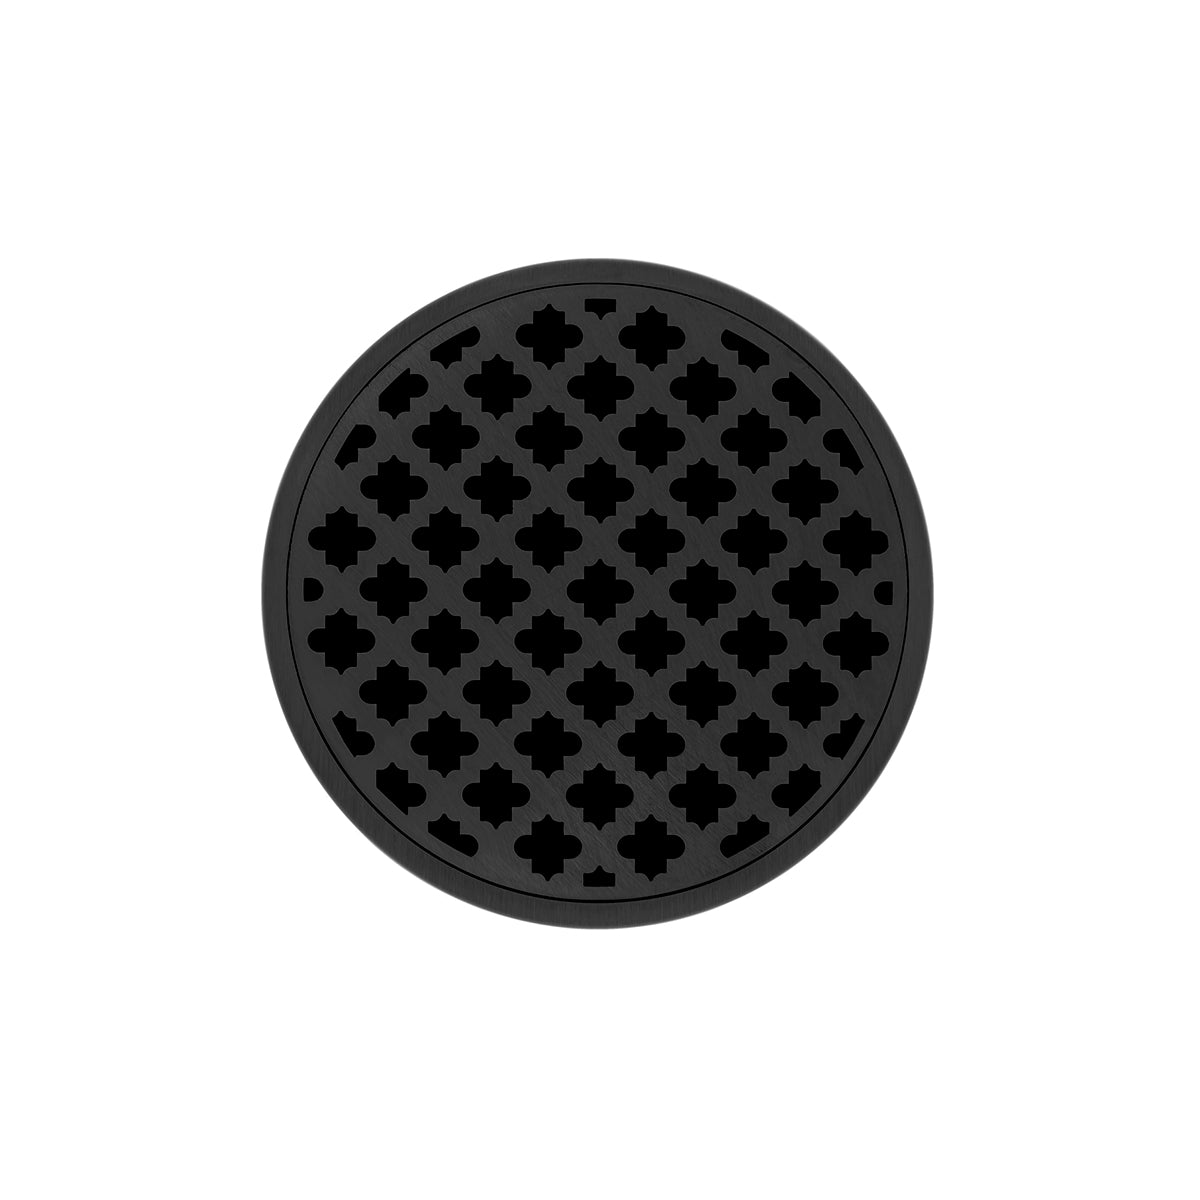 Infinity Drain 5" Round RMD 5 High Flow Premium Center Drain Kit with Moor Pattern Decorative Plate with Cast Iron Drain Body, 3" No-Hub Outlet